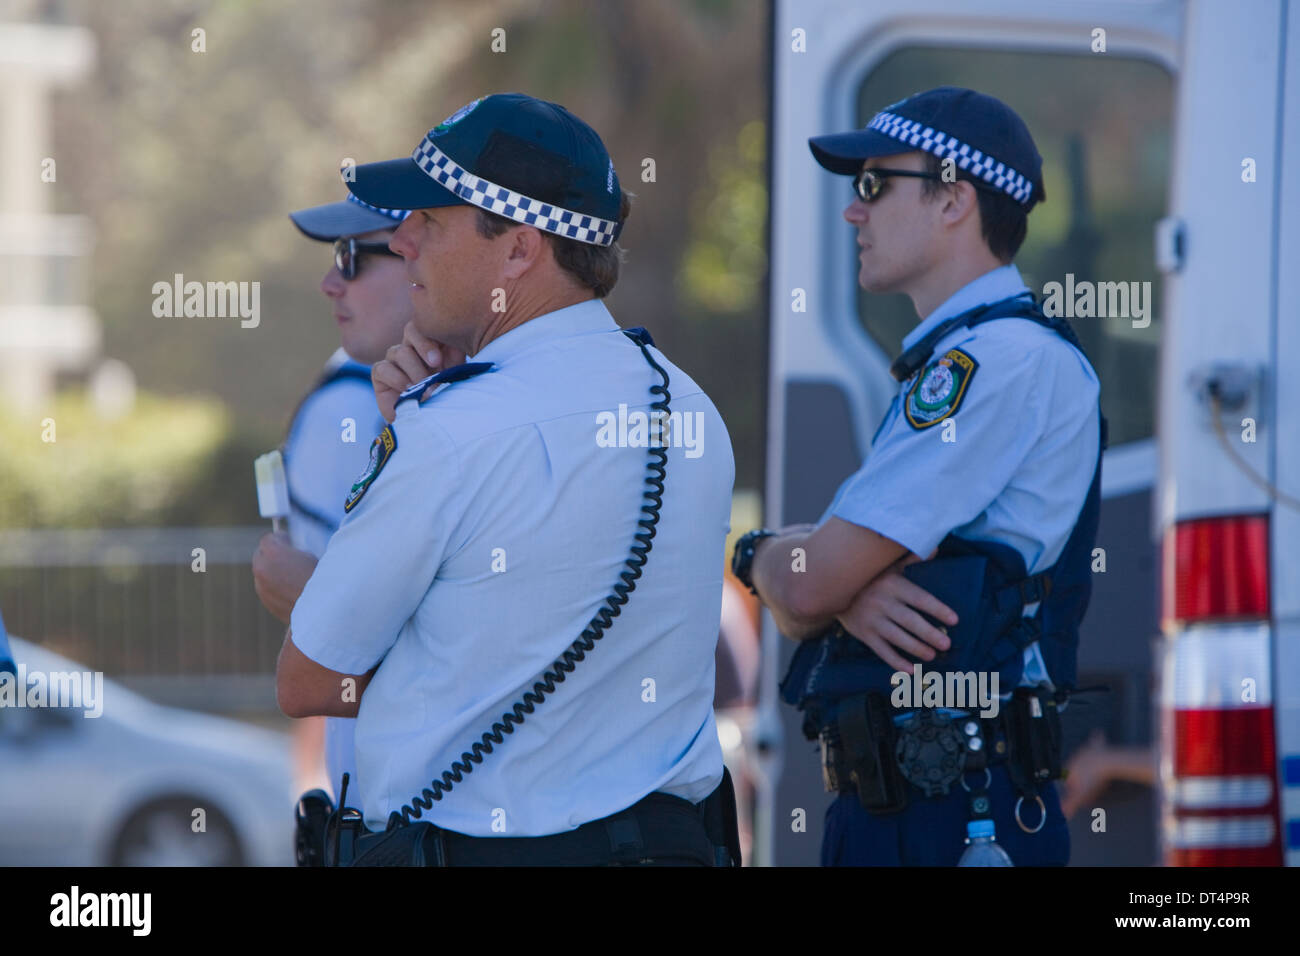 New South Wales State police officers patrolling in Manly Sydney during the australian open of surfing event,2014 Stock Photo